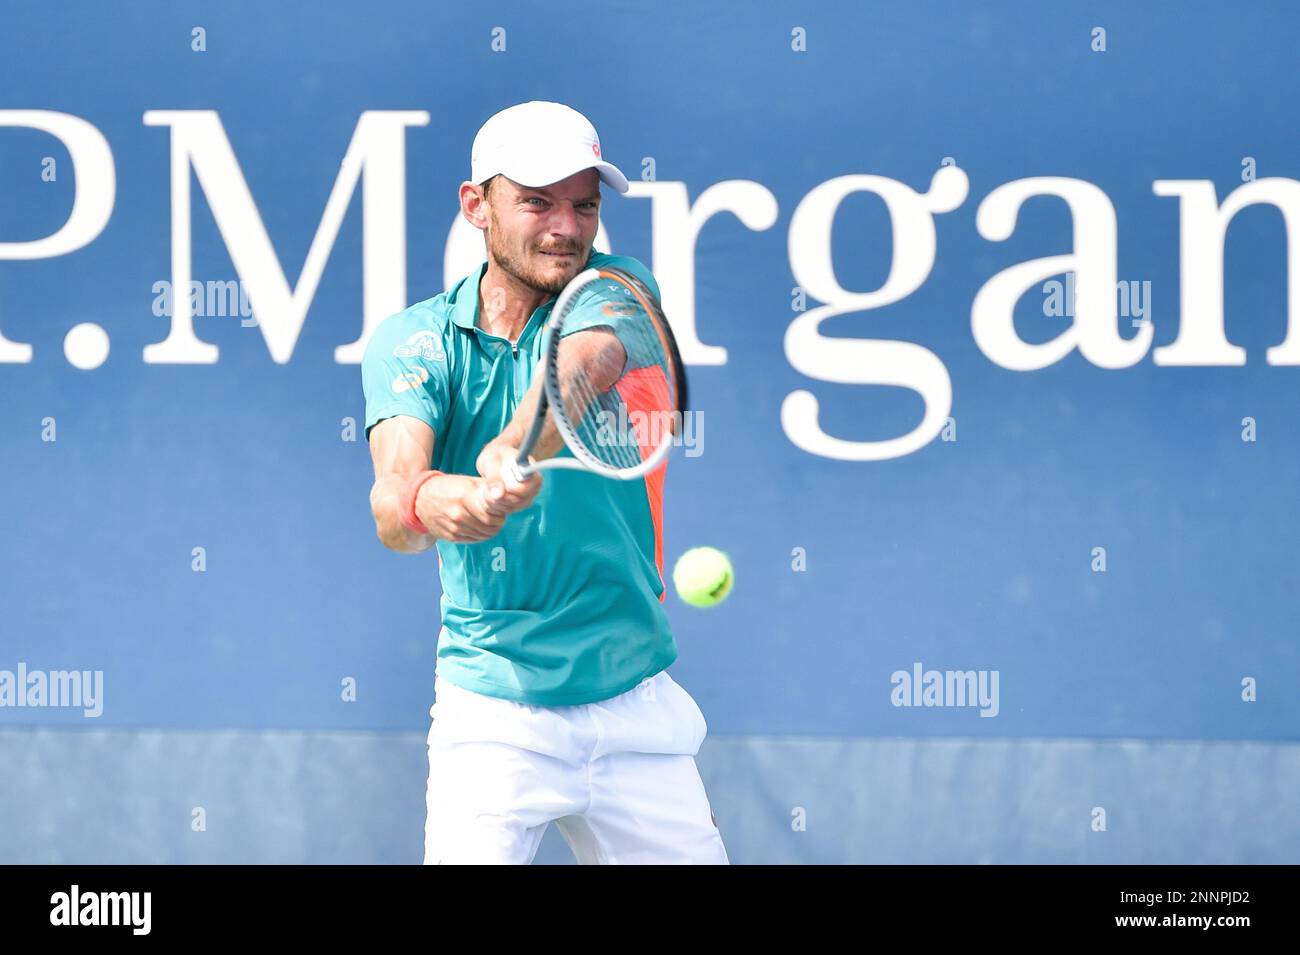 David Goffin in action against Filip Krajinovic during a mens singles match at the 2020 US Open, Friday, Sept